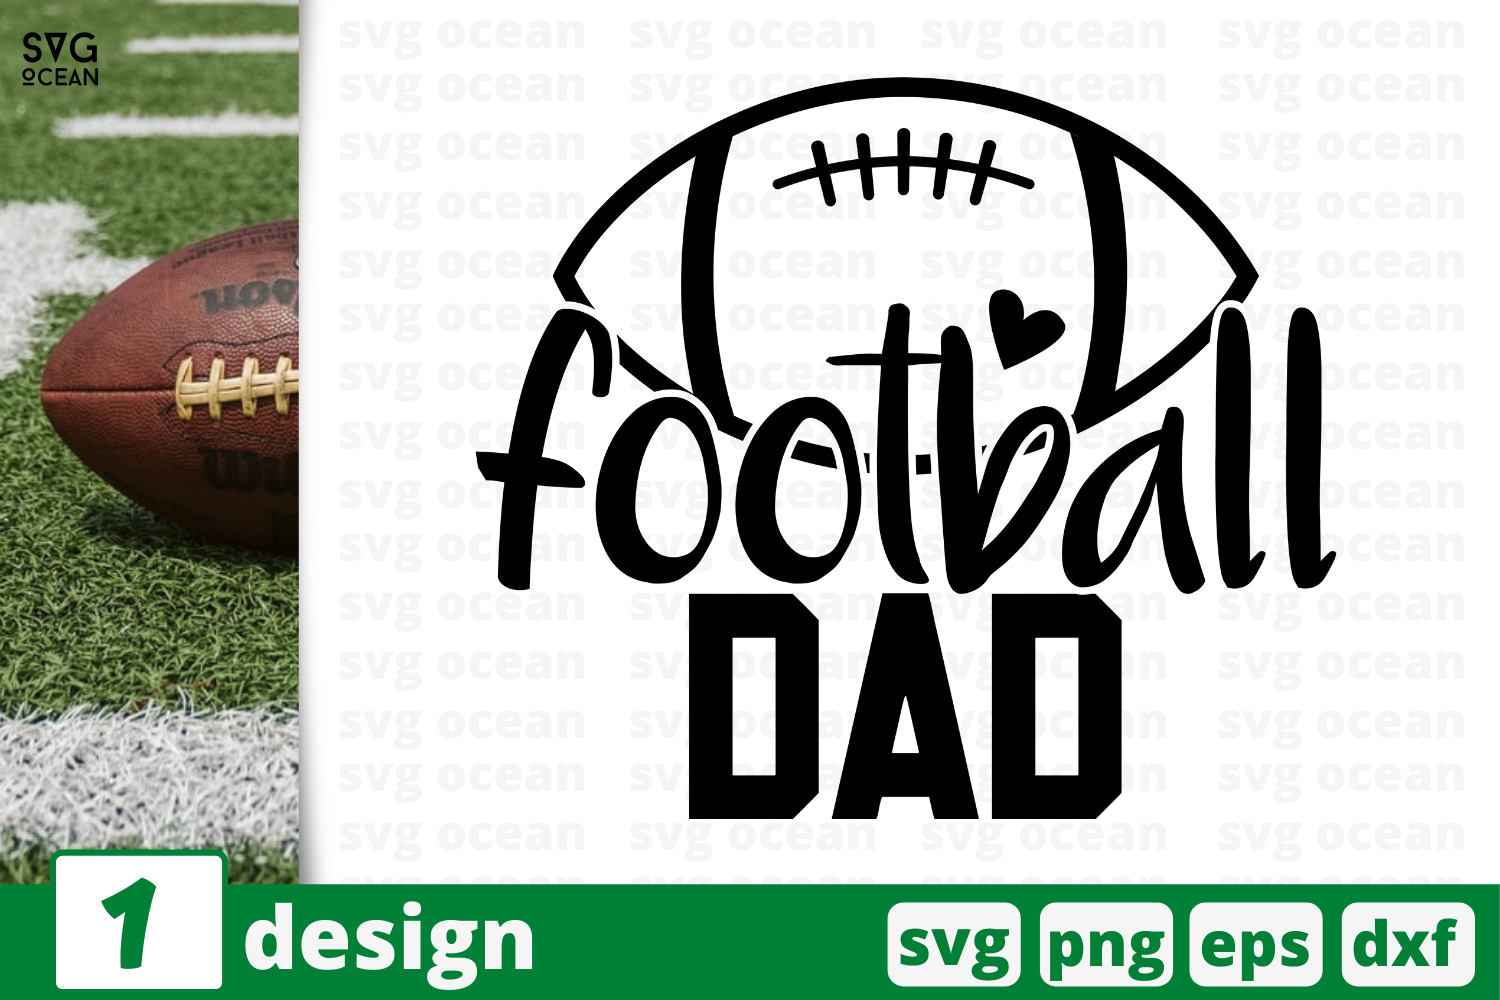 Download 1 FOOTBALL DAD, football quote cricut svg By SvgOcean ...